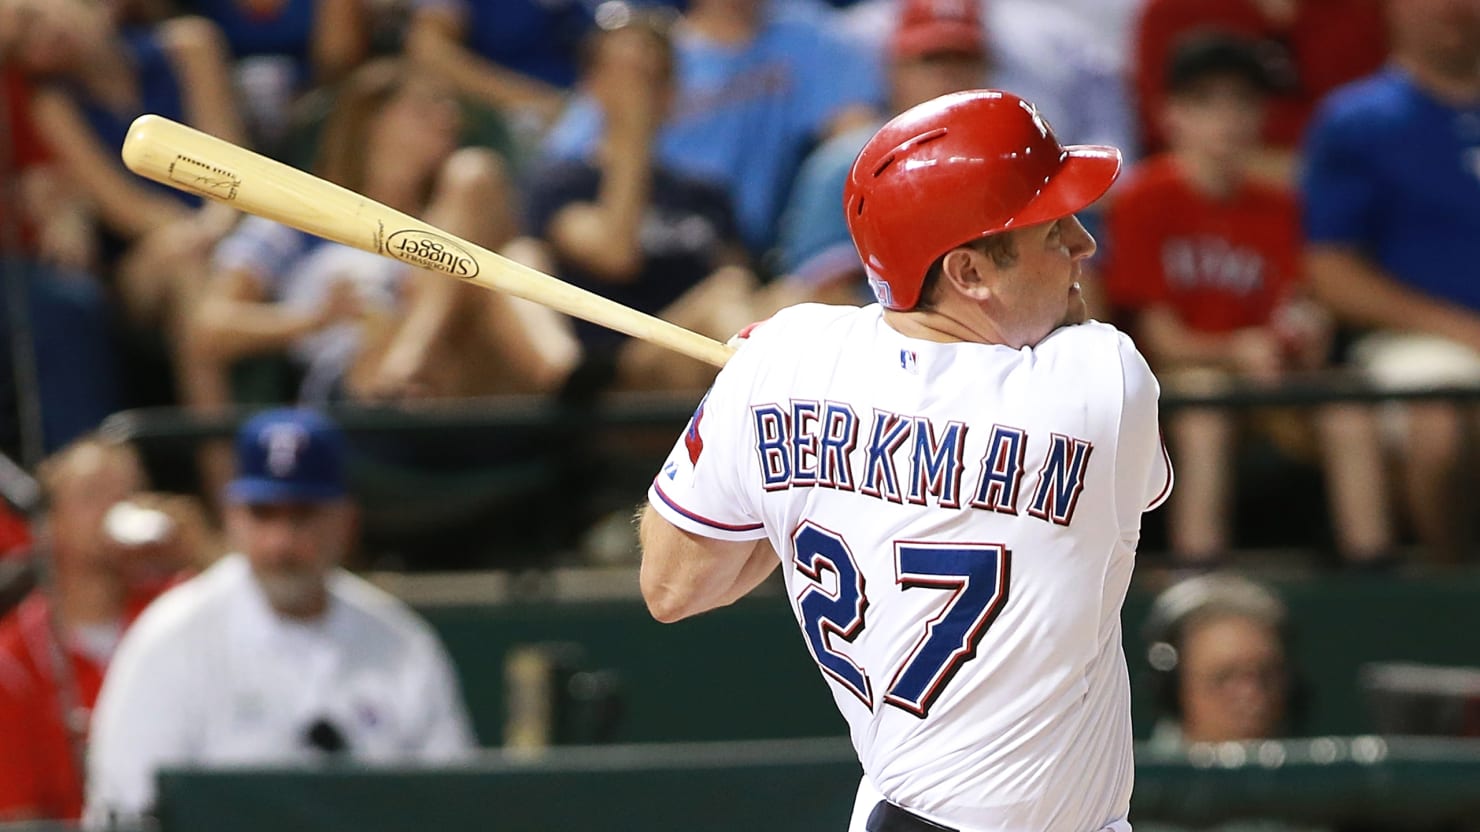 Lance Berkman not ready to return from disabled list - NBC Sports